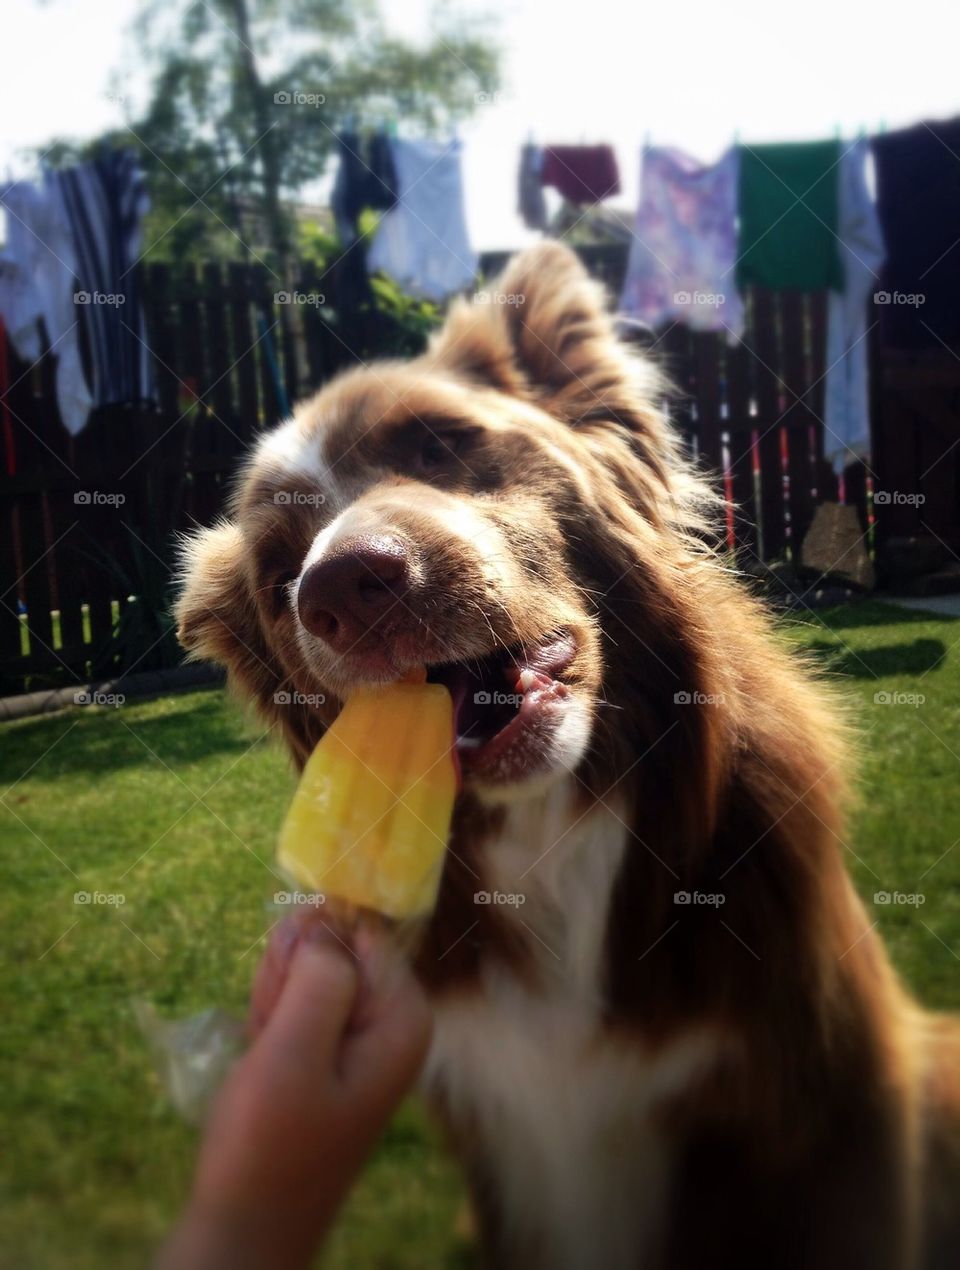 Dog licking ice lolly